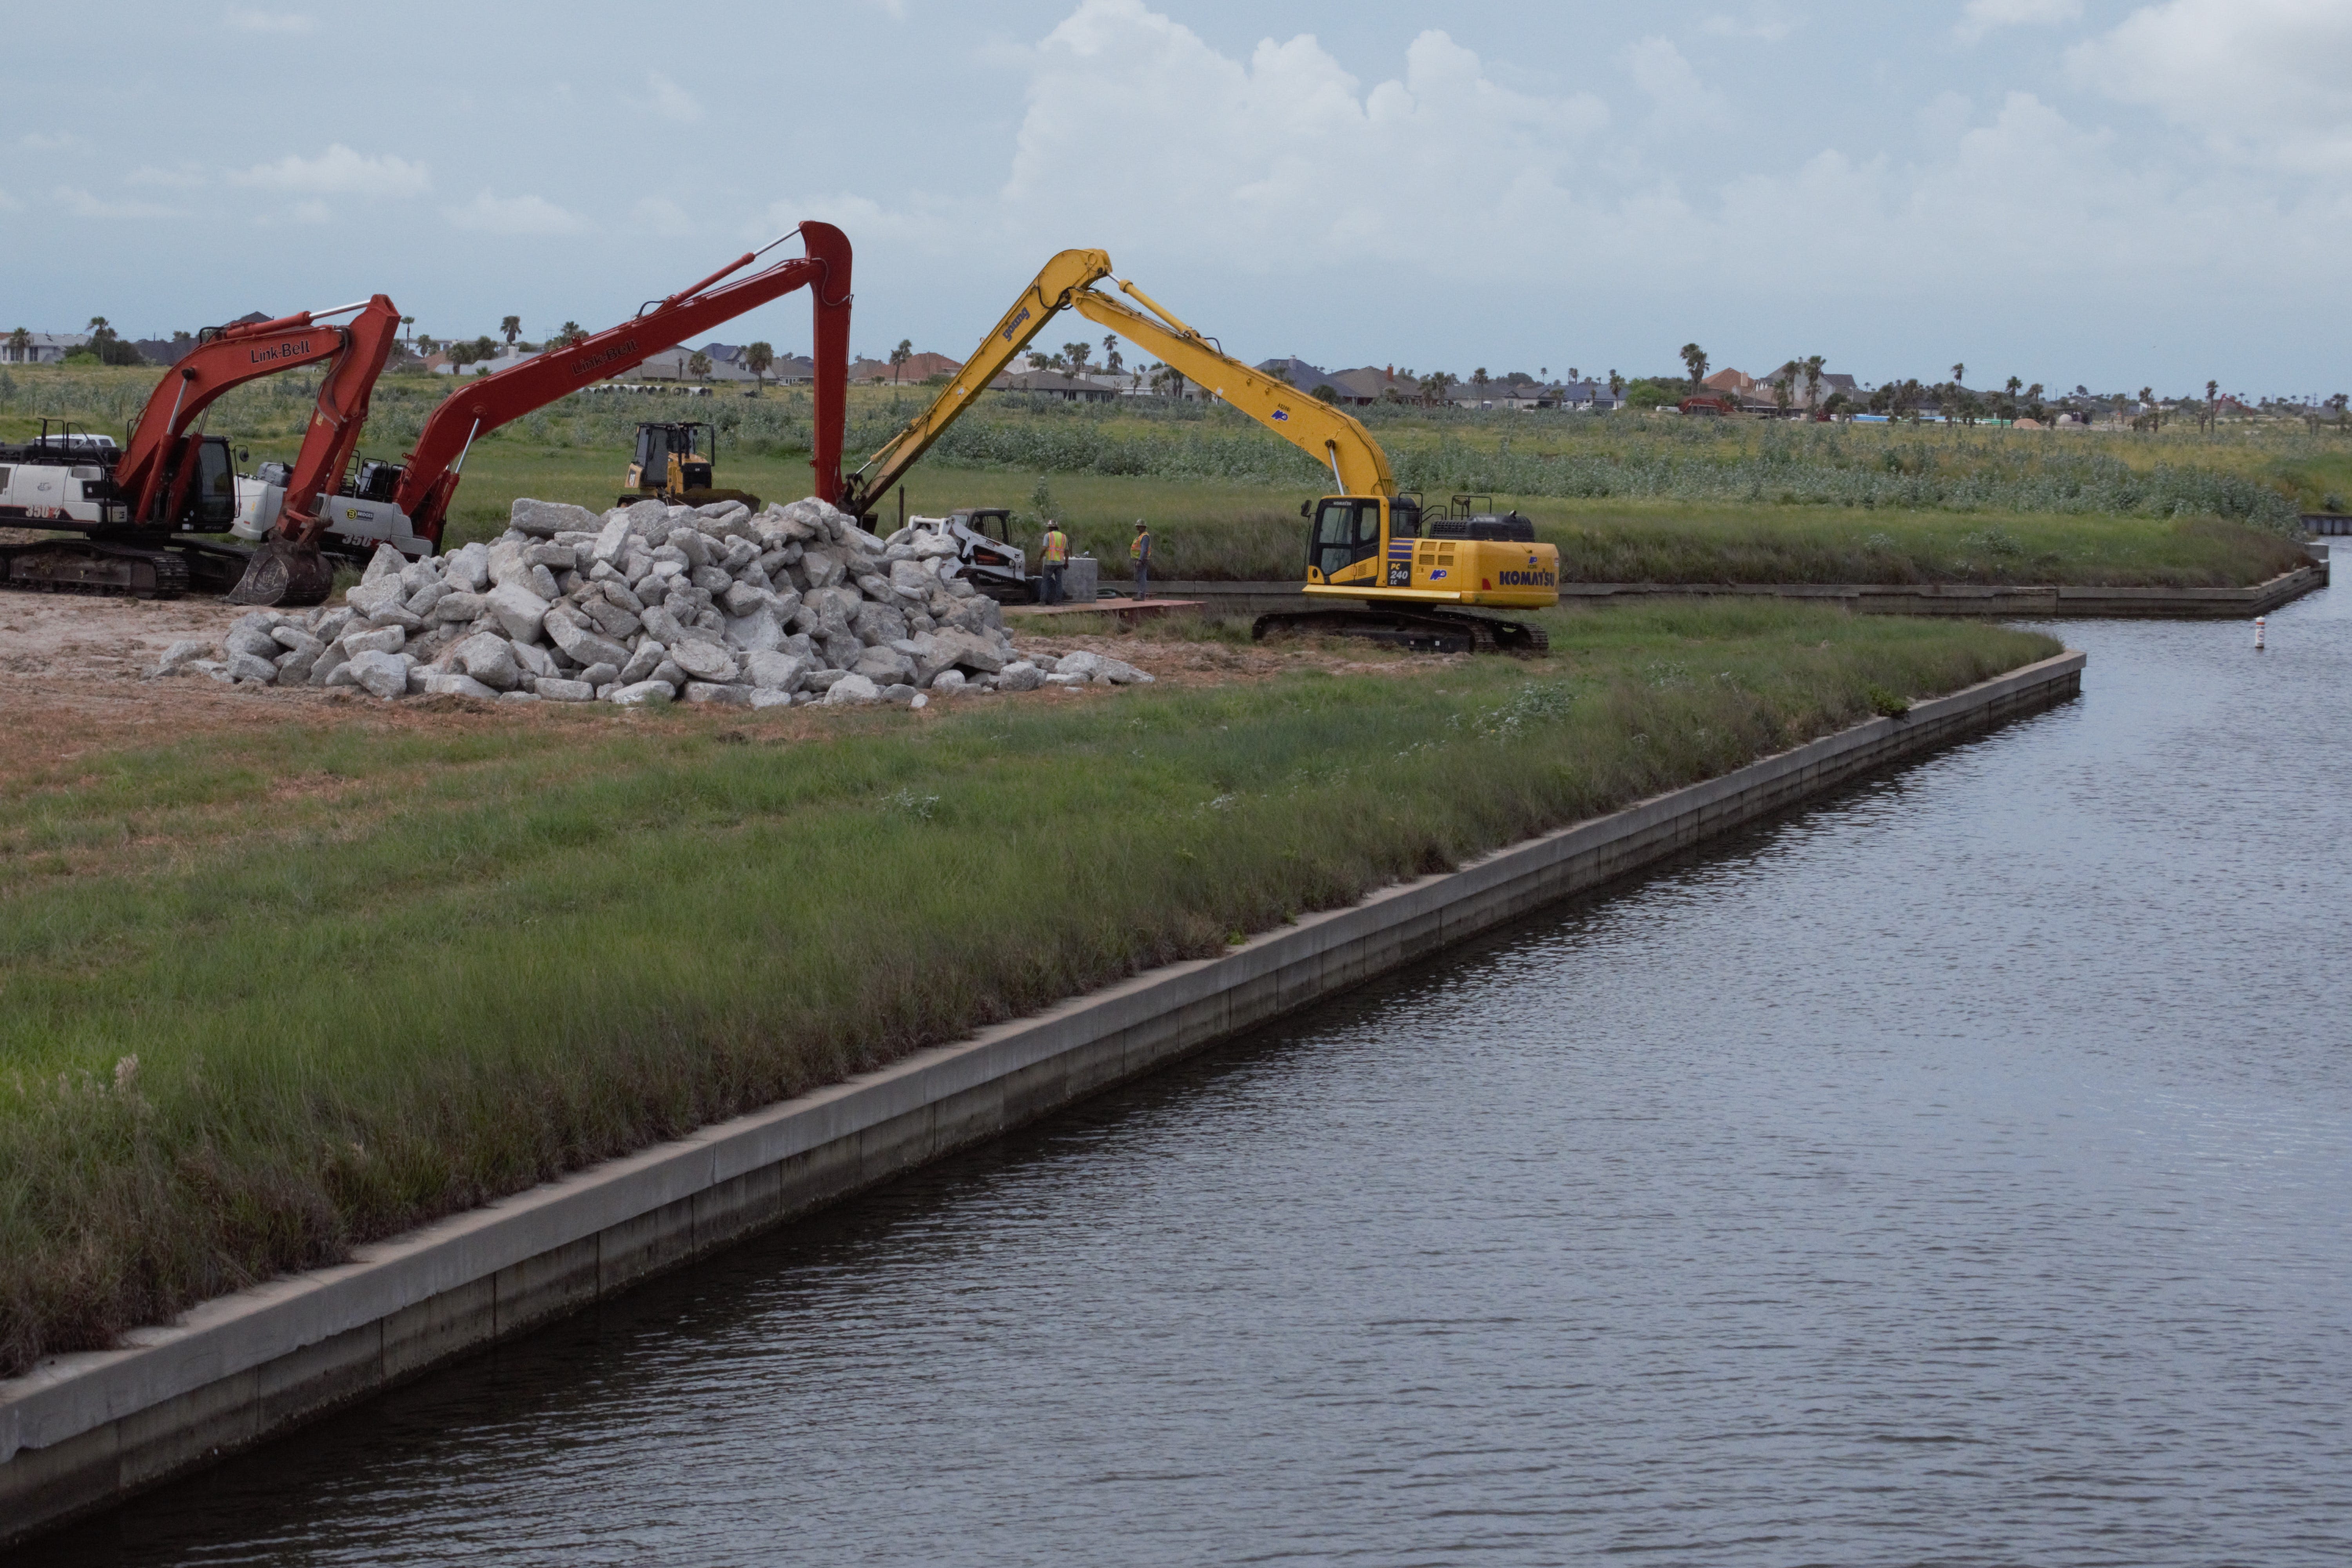 Project underway to armor Gypsy and Whitecap bridges on North Padre Island